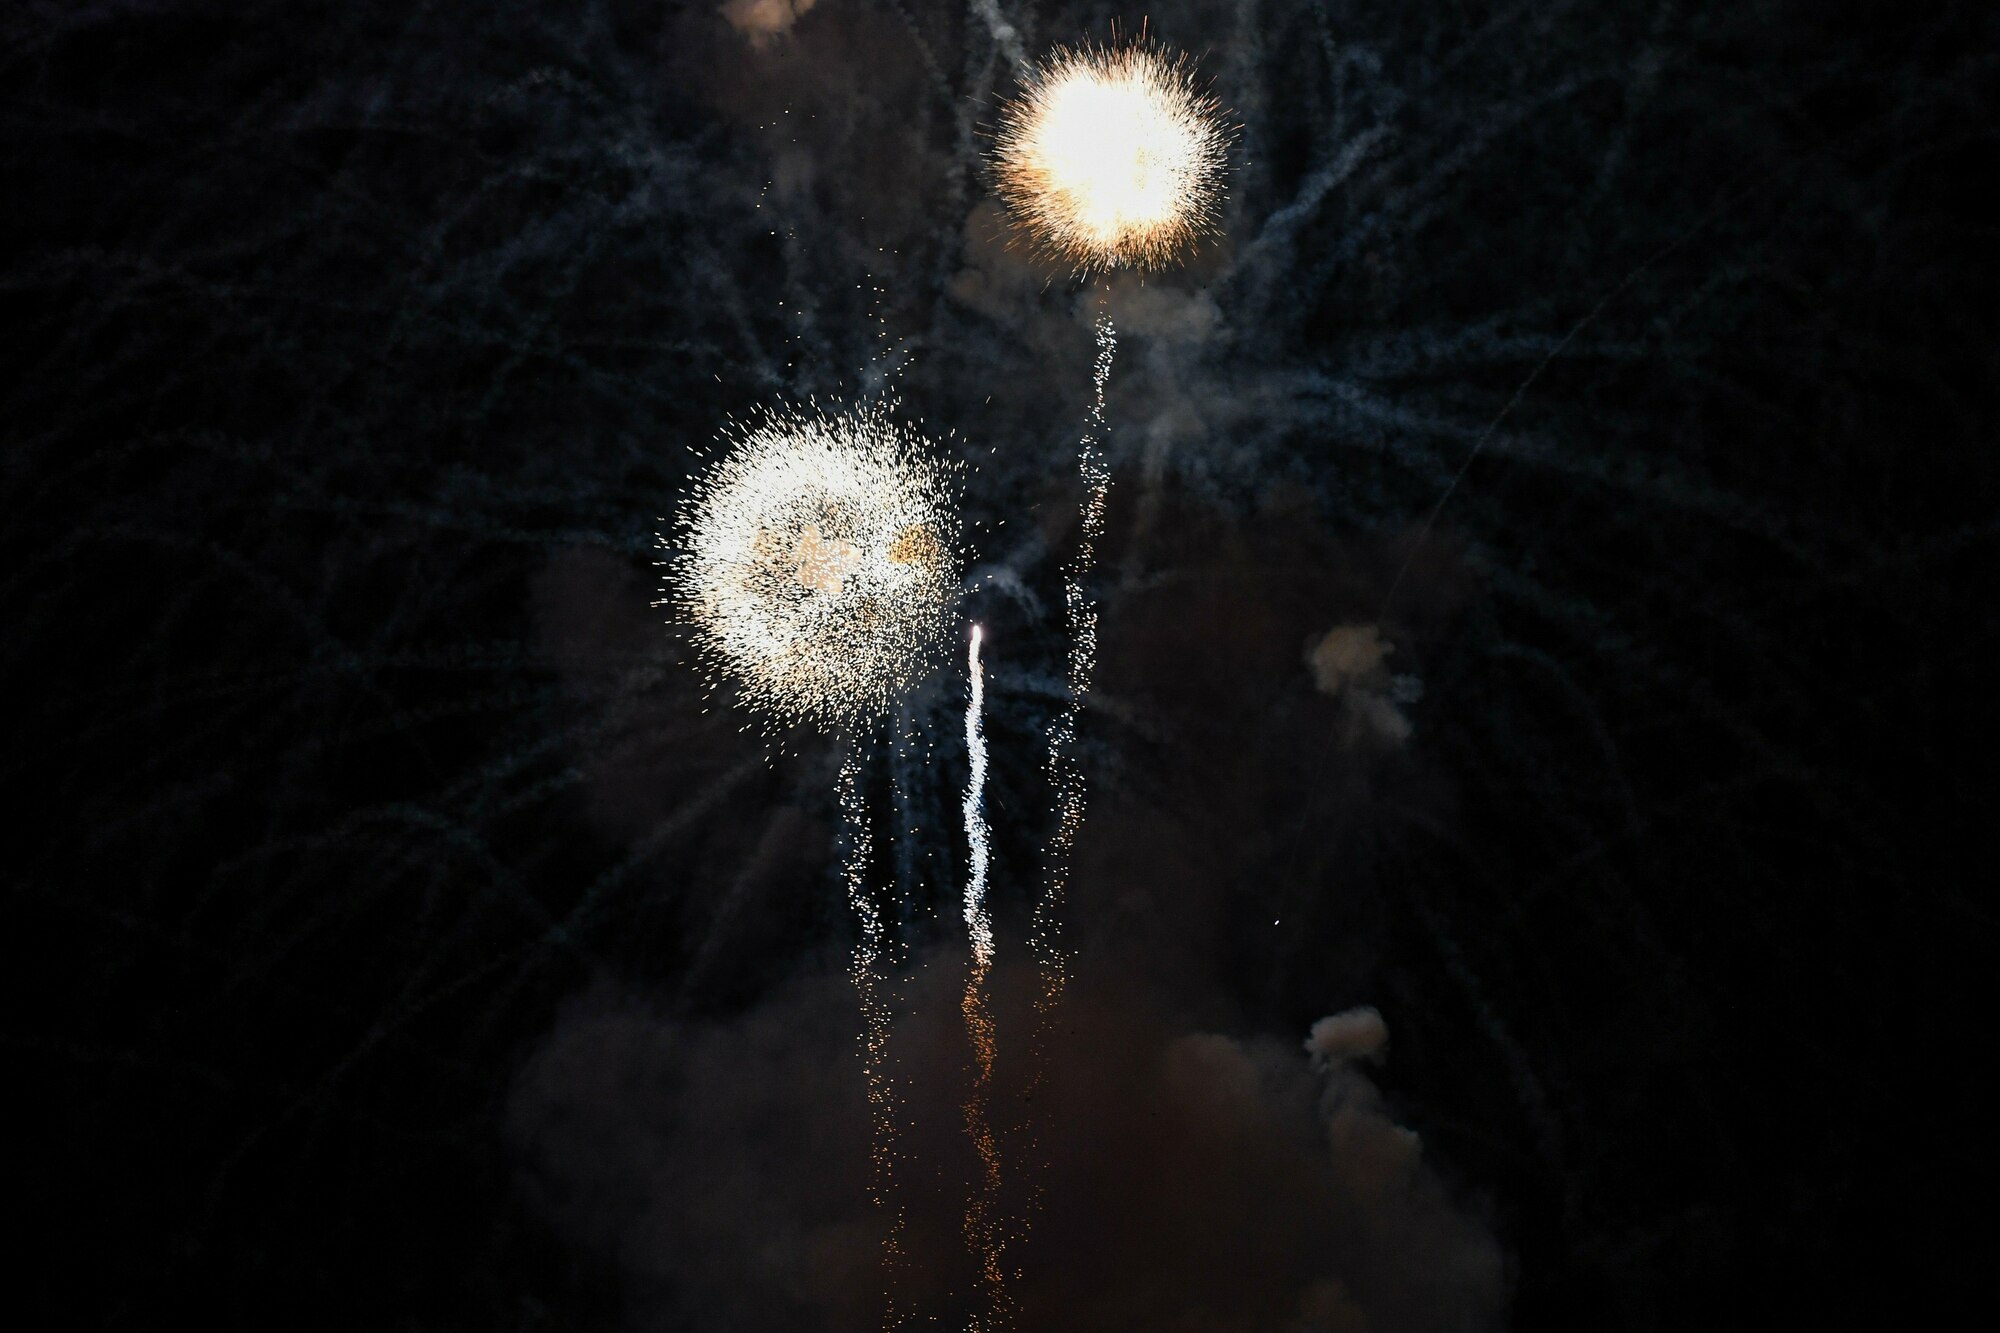 Airshow fireworks in night sky